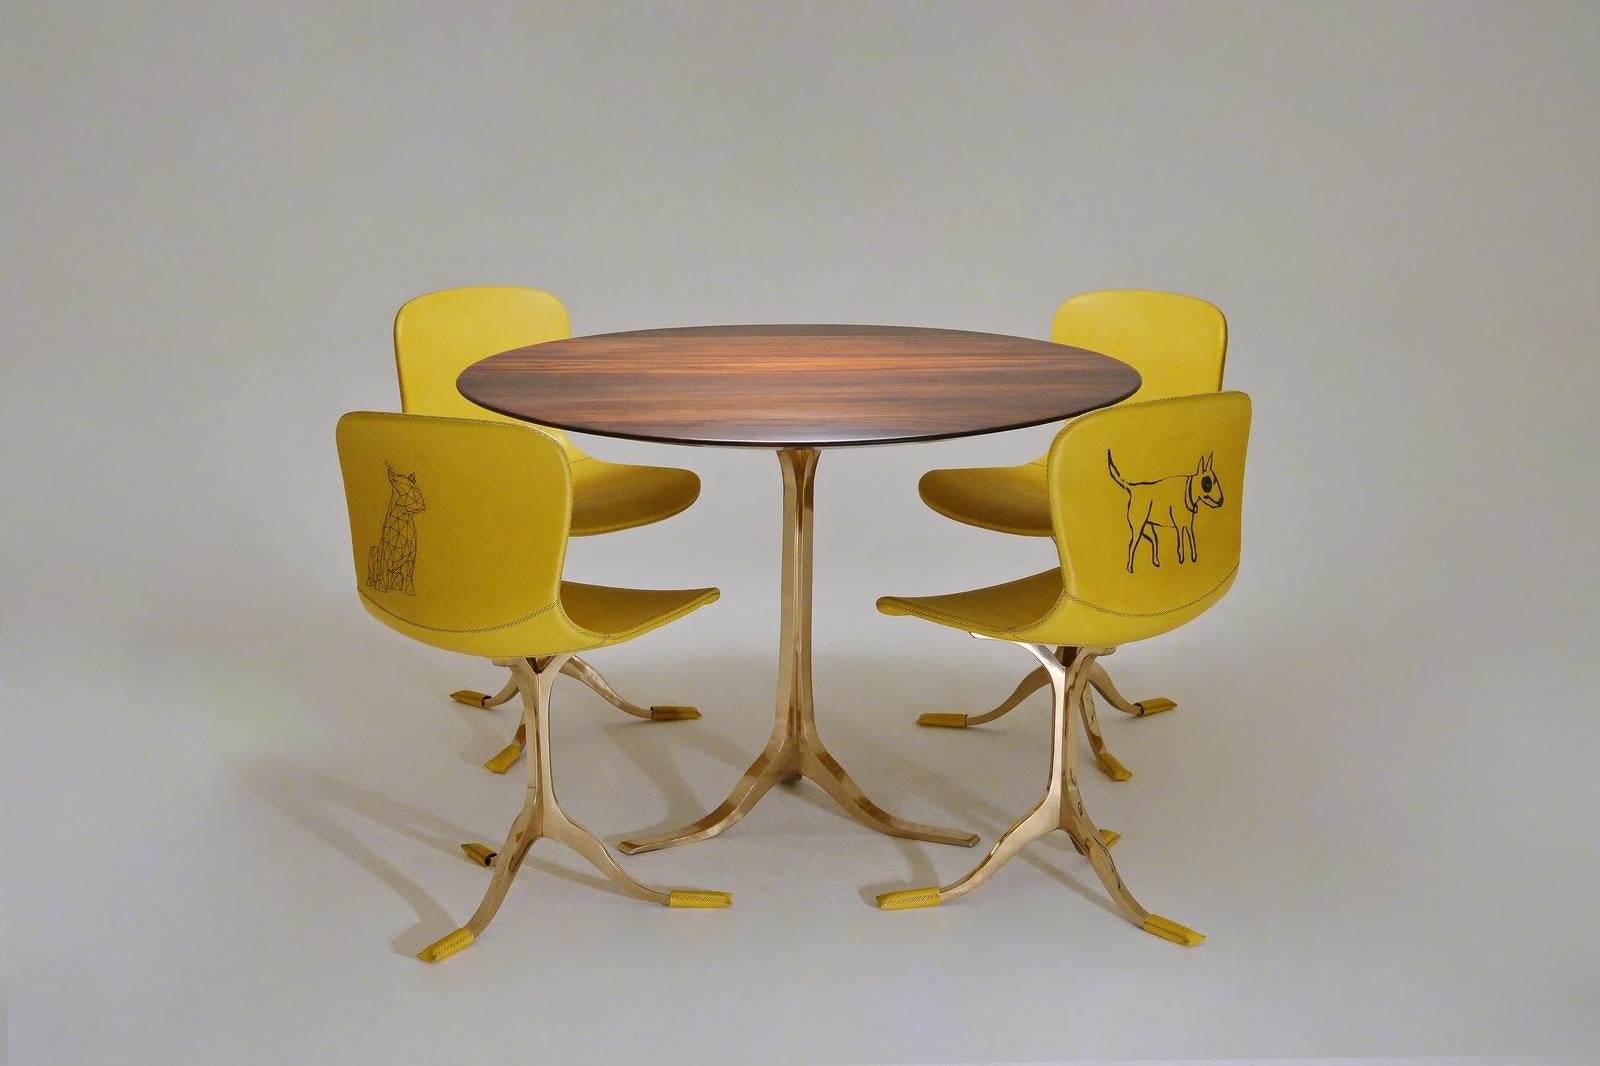 Contemporary Bespoke Round Table, Reclaimed Hardwood, Bronze Base by P. Tendercool For Sale